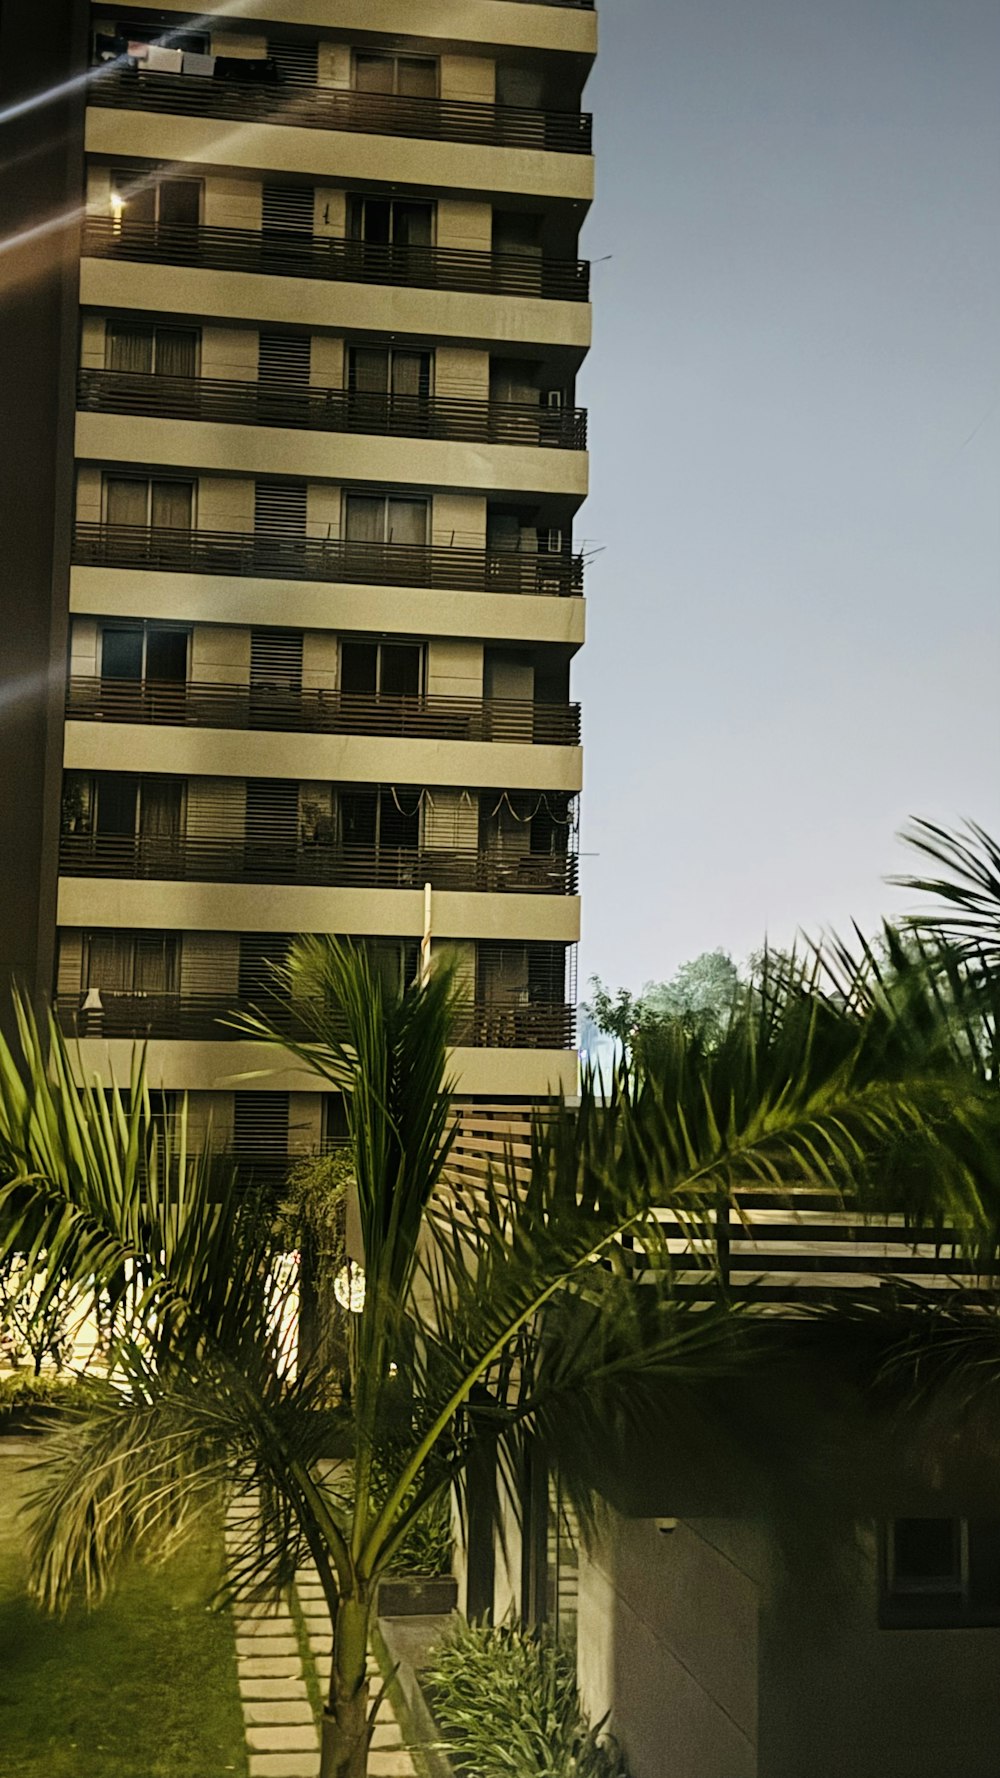 a tall building with balconies next to a palm tree